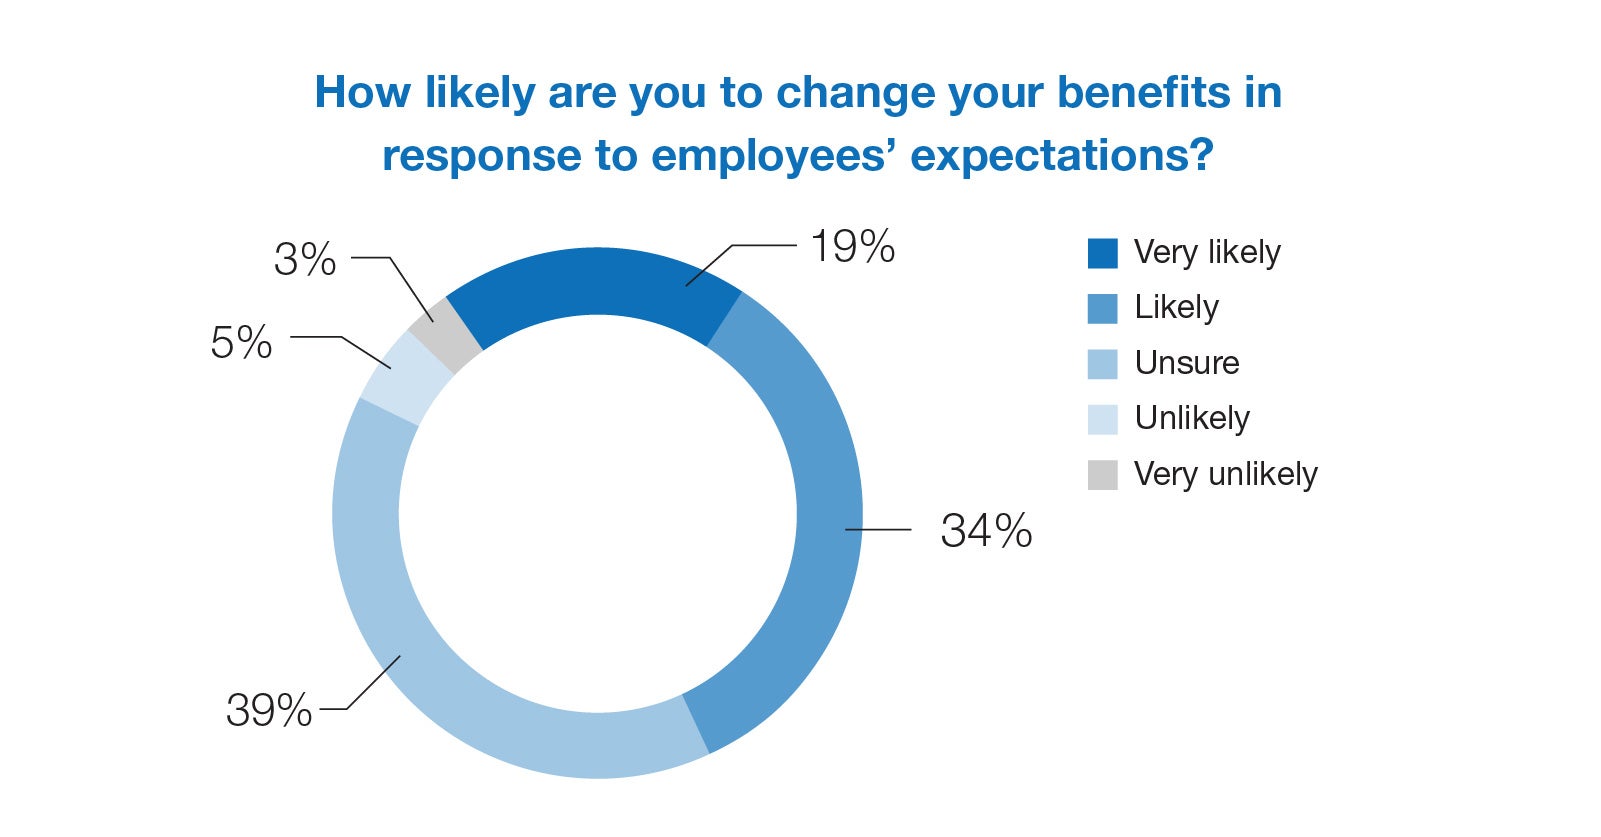 How likely are you to change your benefit in response to employee's expectations?